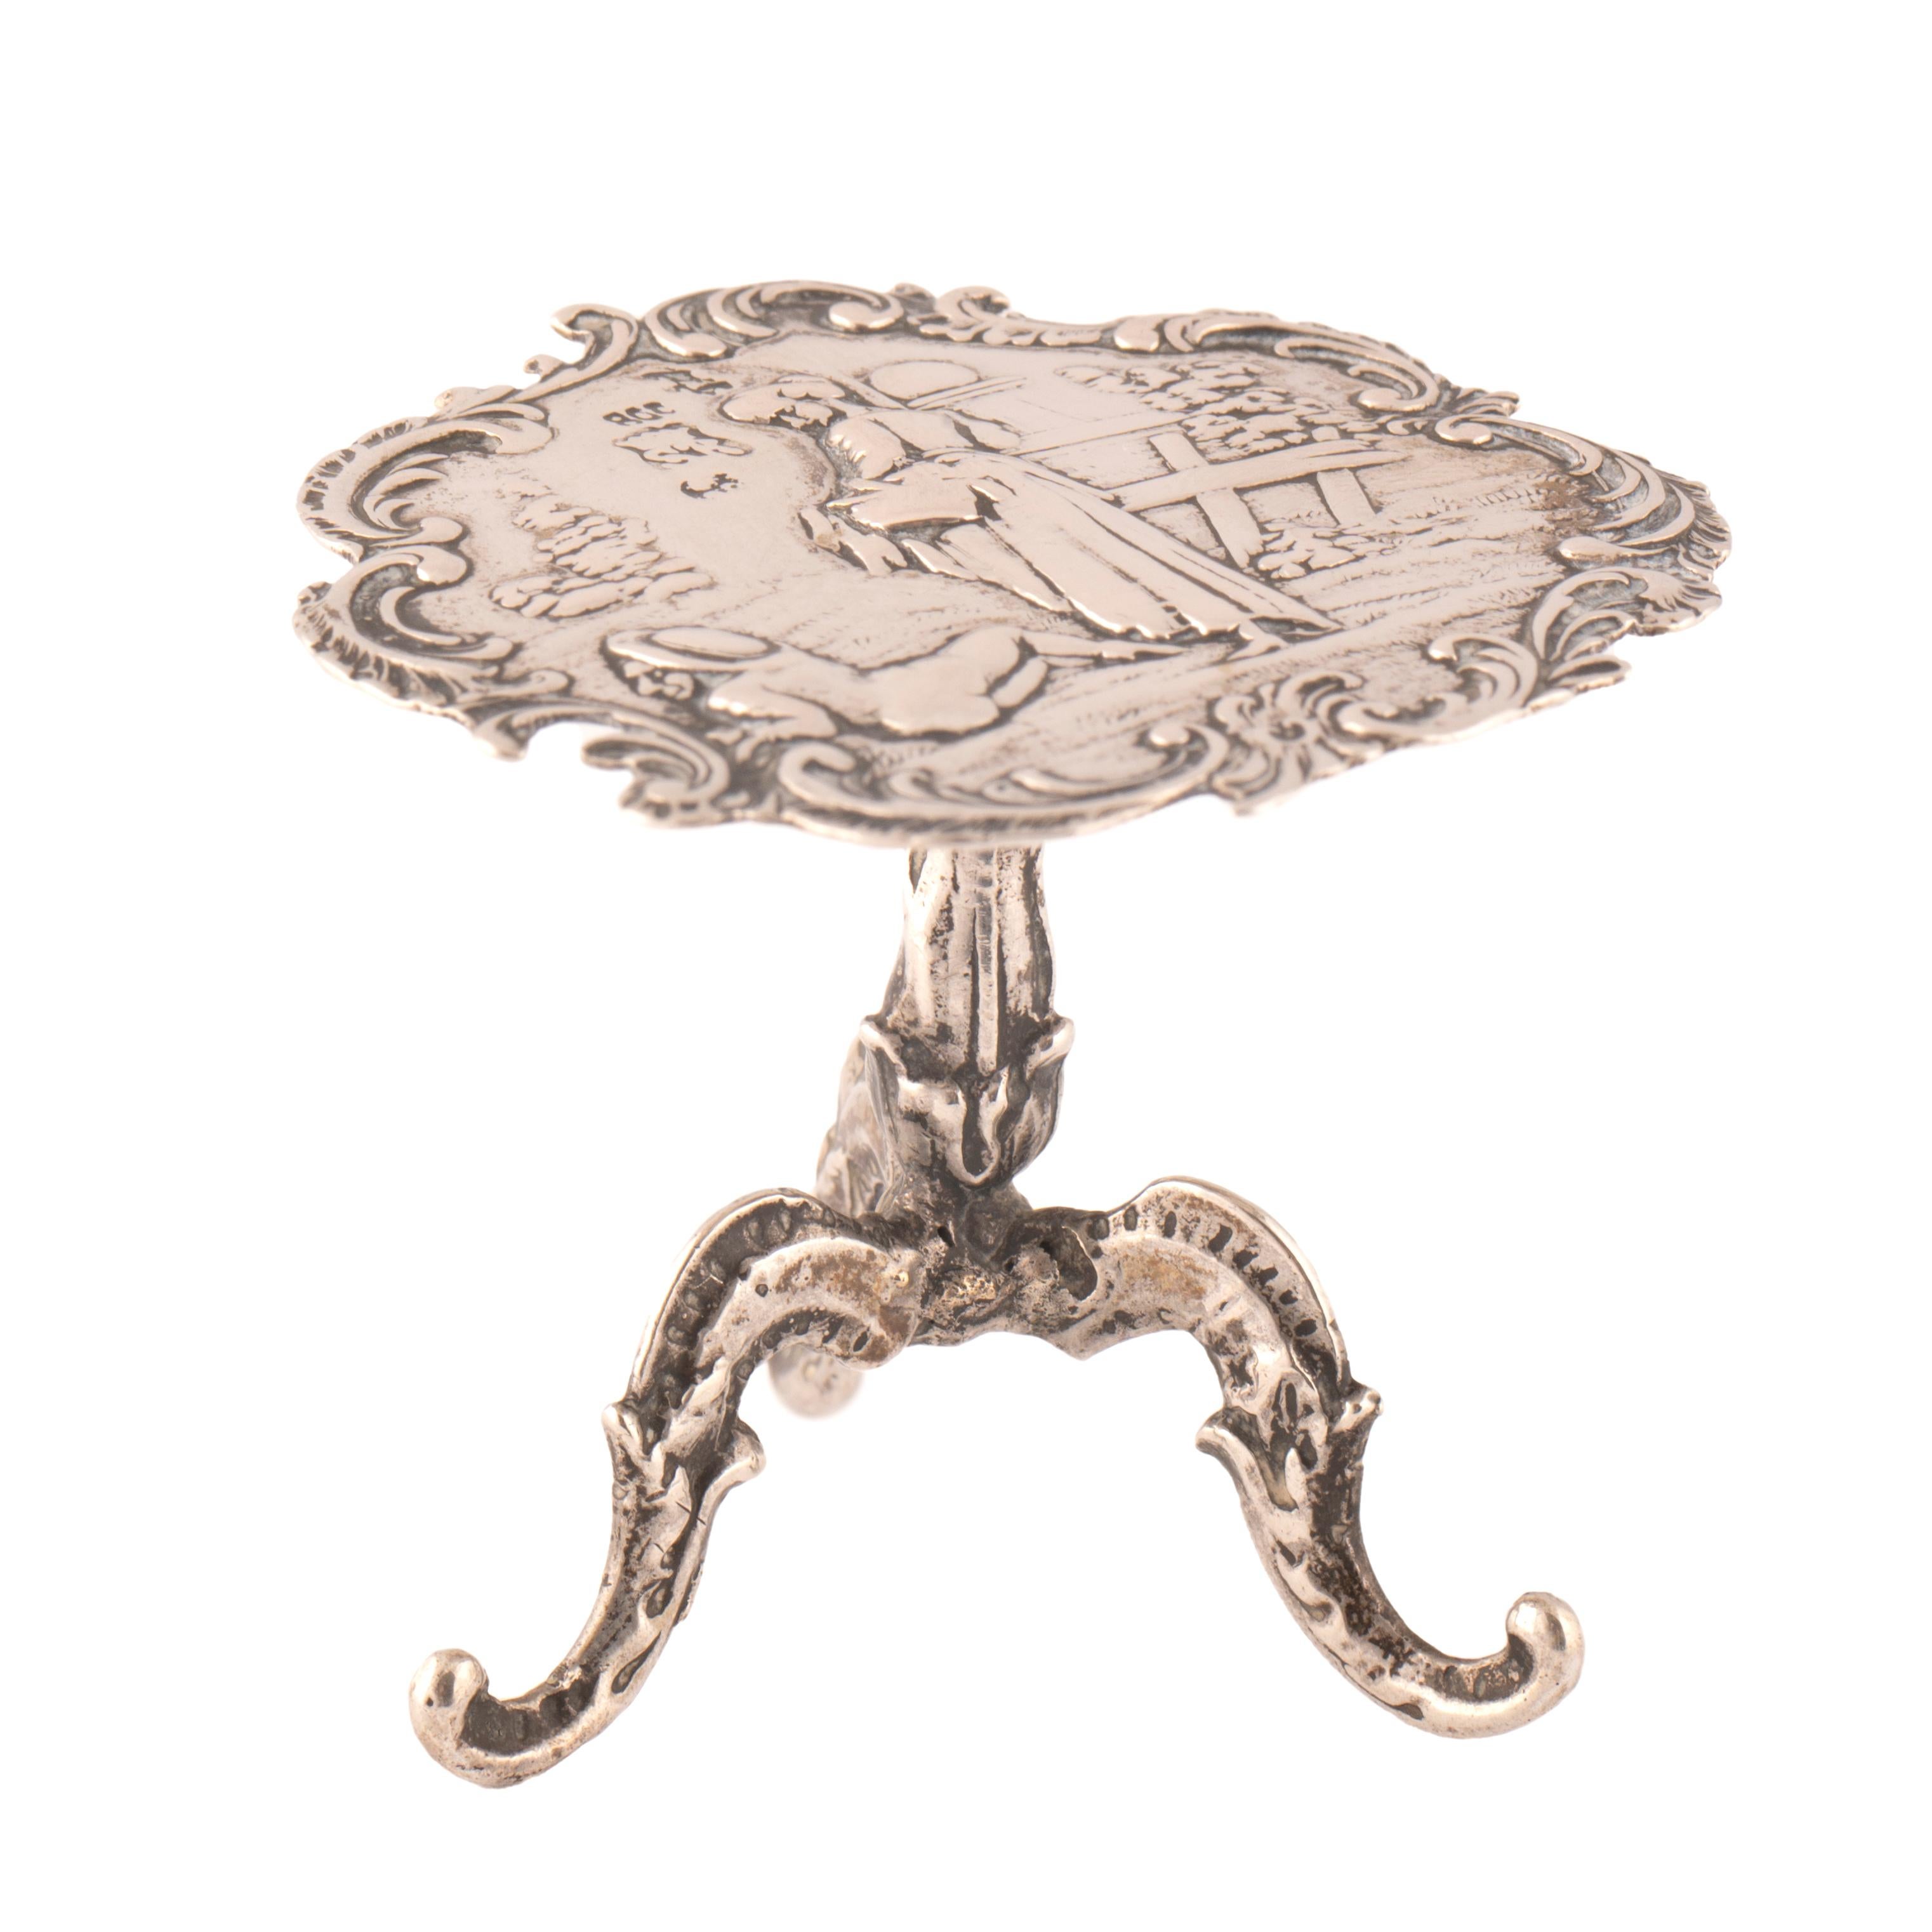 Charming miniature silver Rococo style pedestal table made at the turn of the last century for a doll house.  In the Romantic taste, the shaped circular tabletop of repoussé silver recalling paintings by the French 17th century artist Watteau